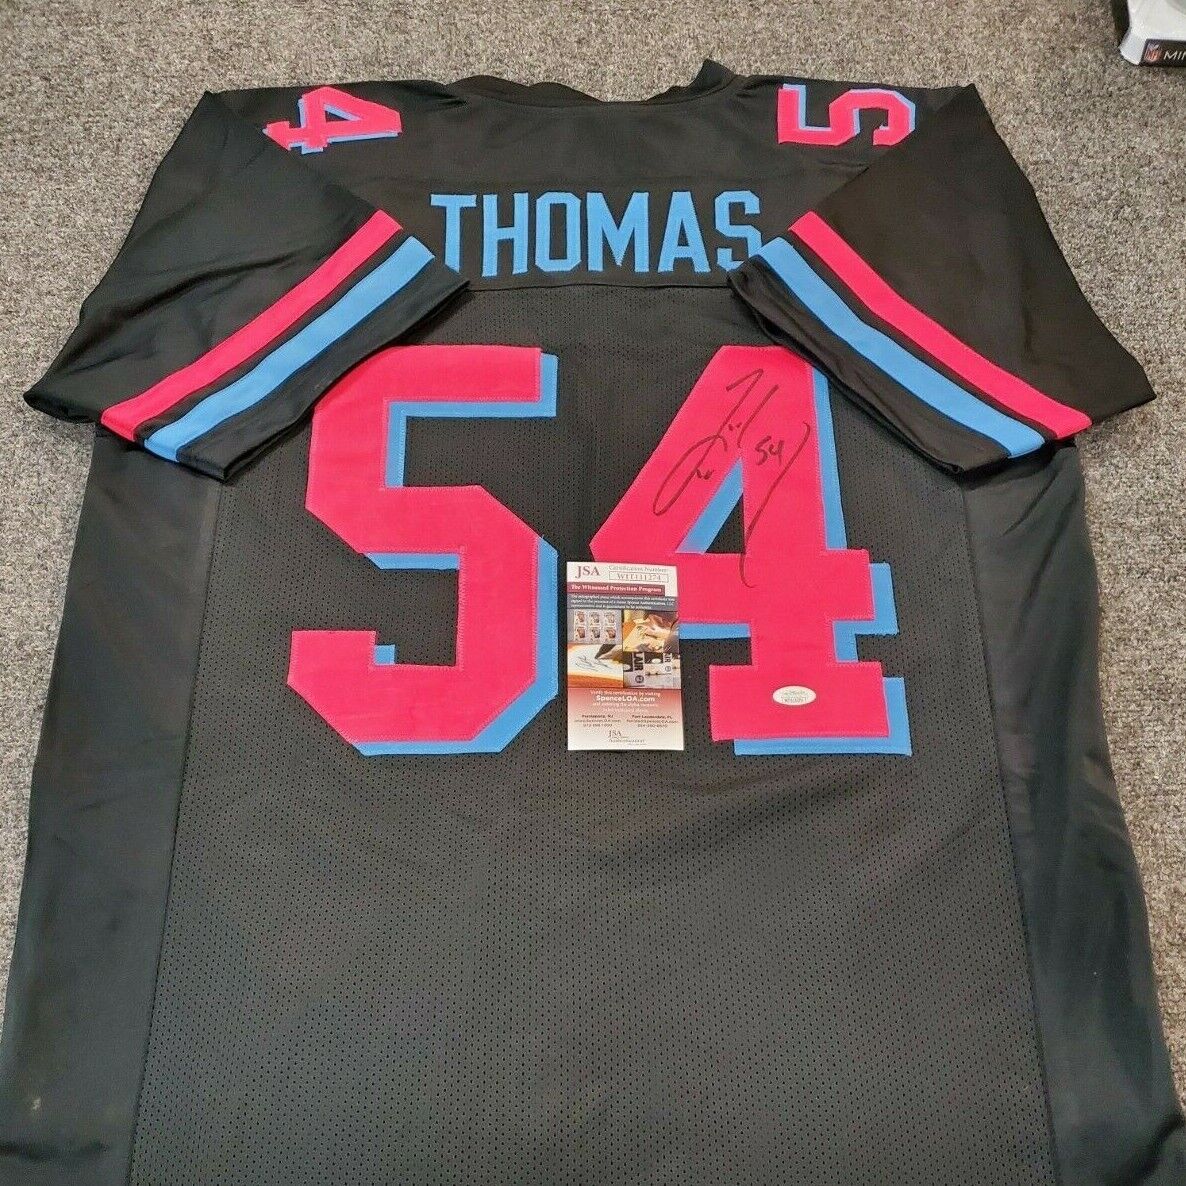 Miami Dolphins Zach Thomas Autographed Signed Miami Vice Jersey